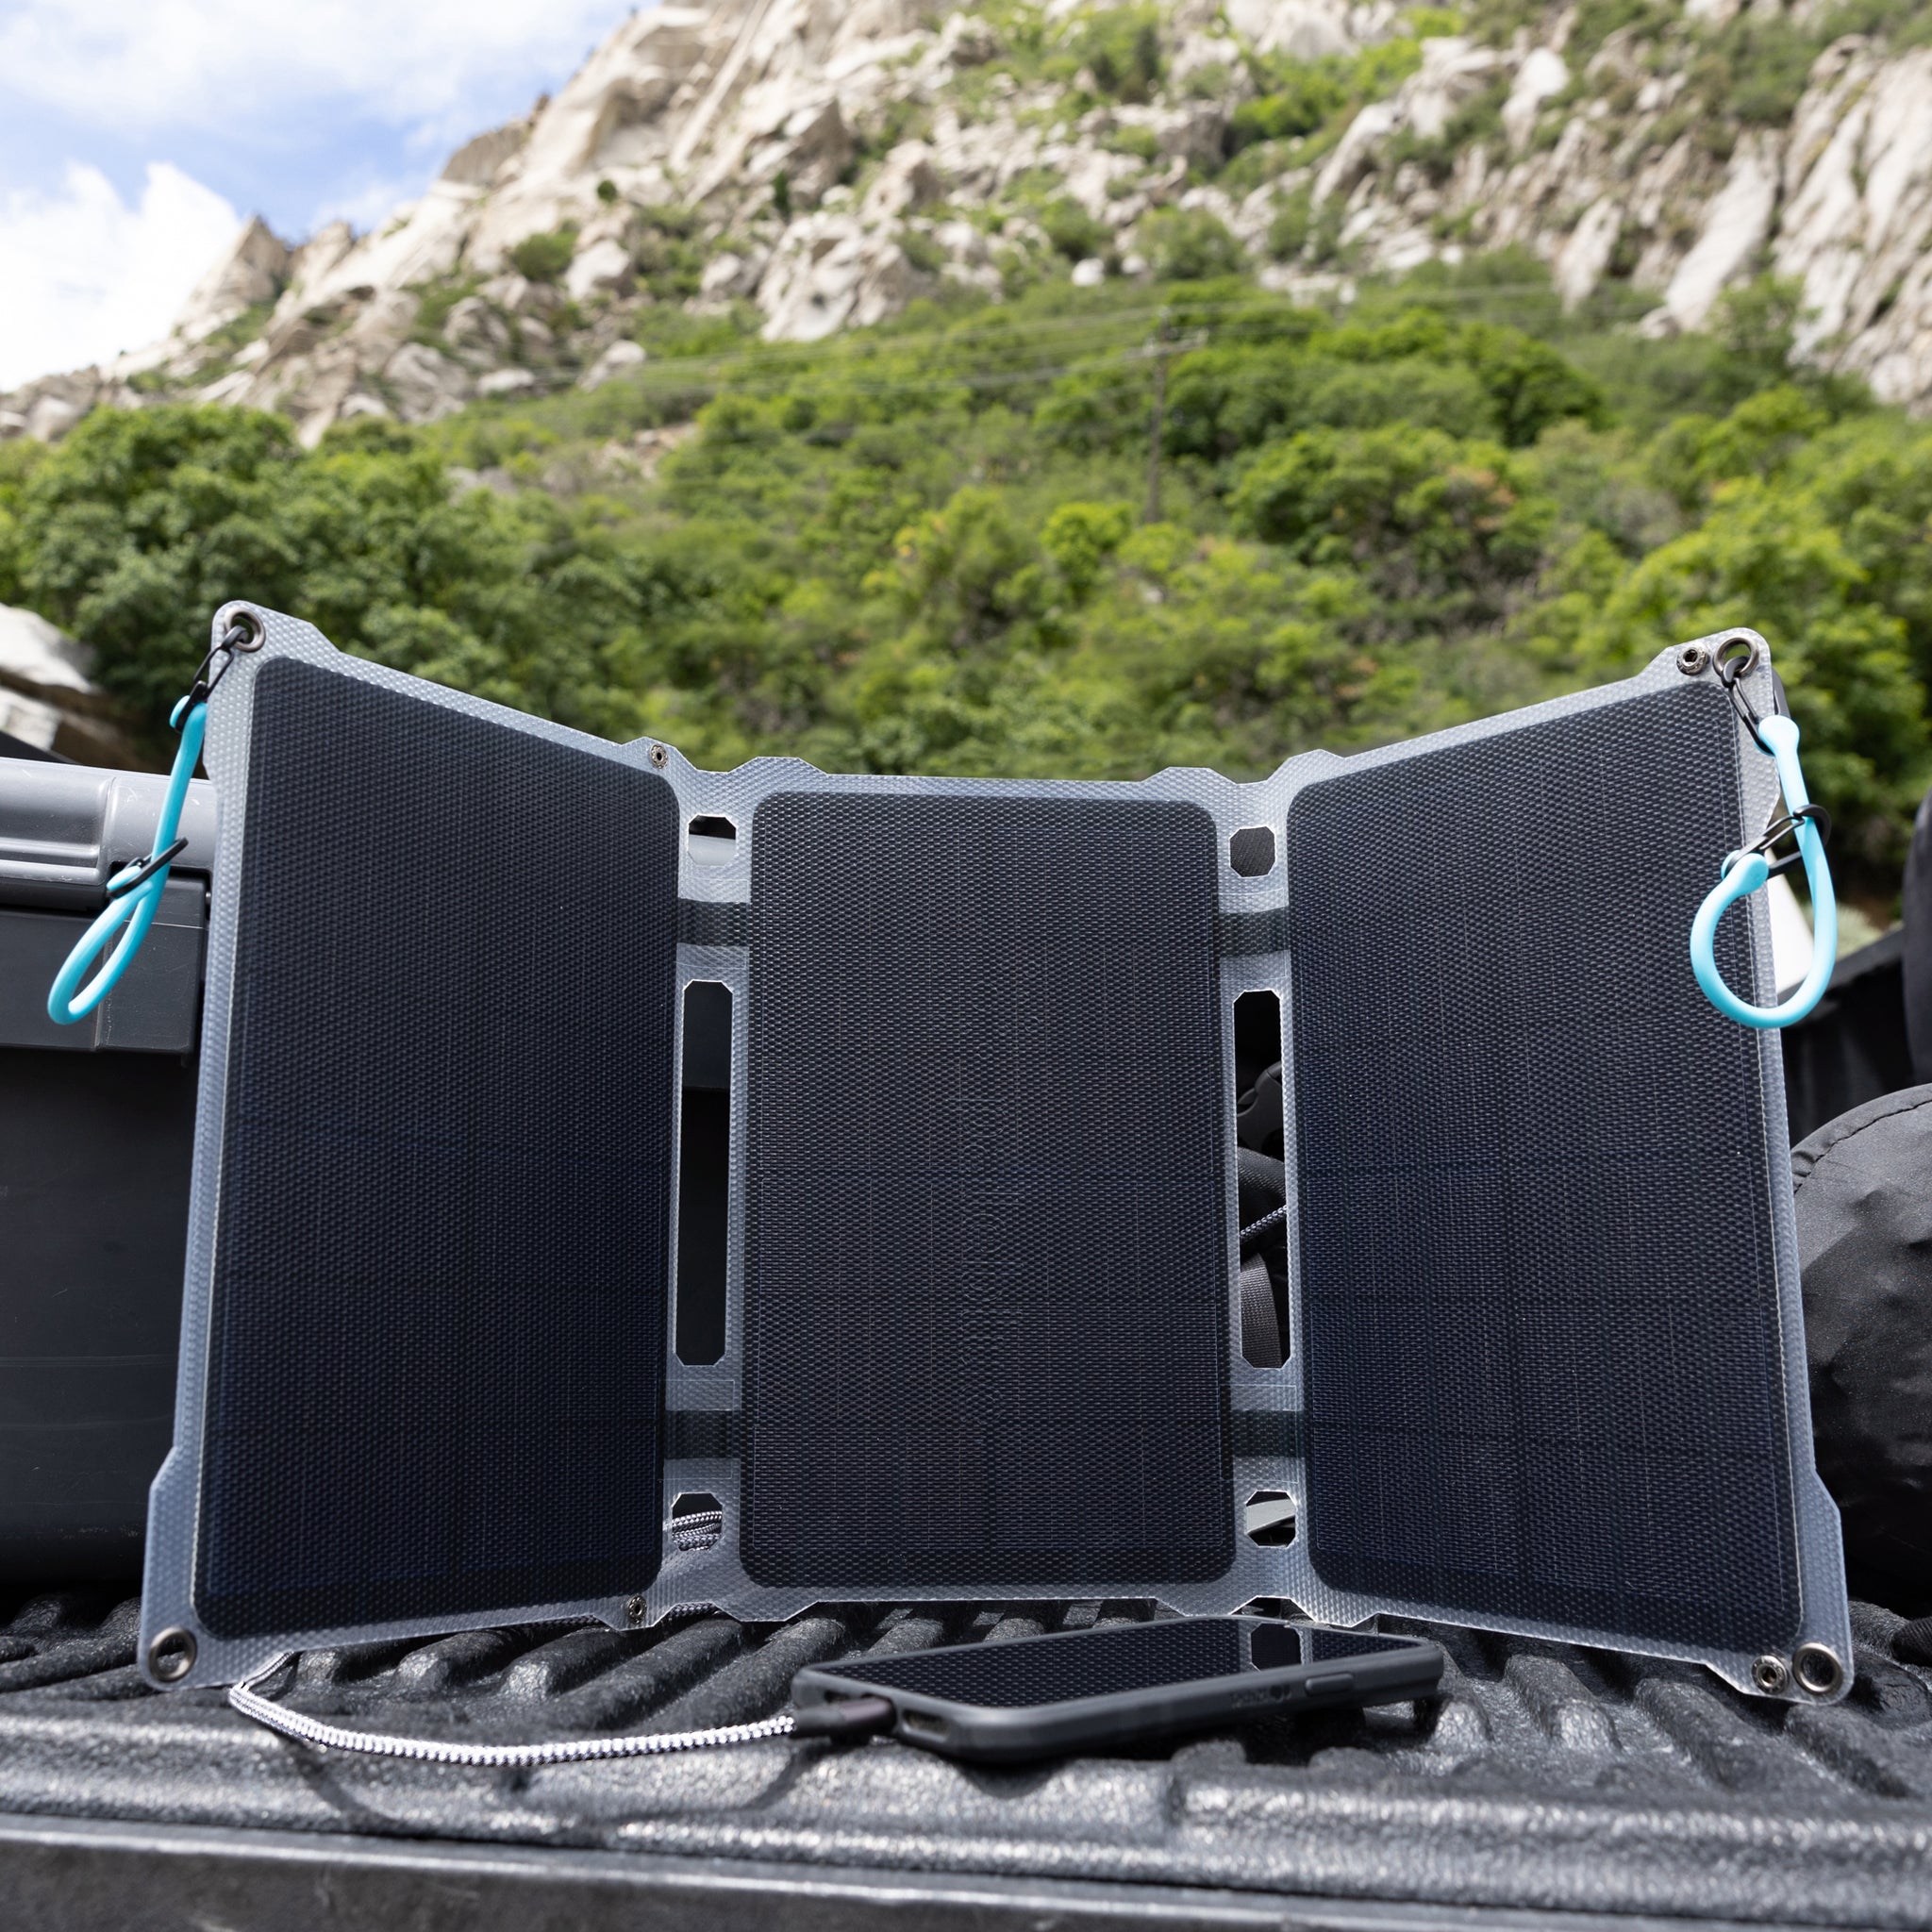 Approach Solar Chargers